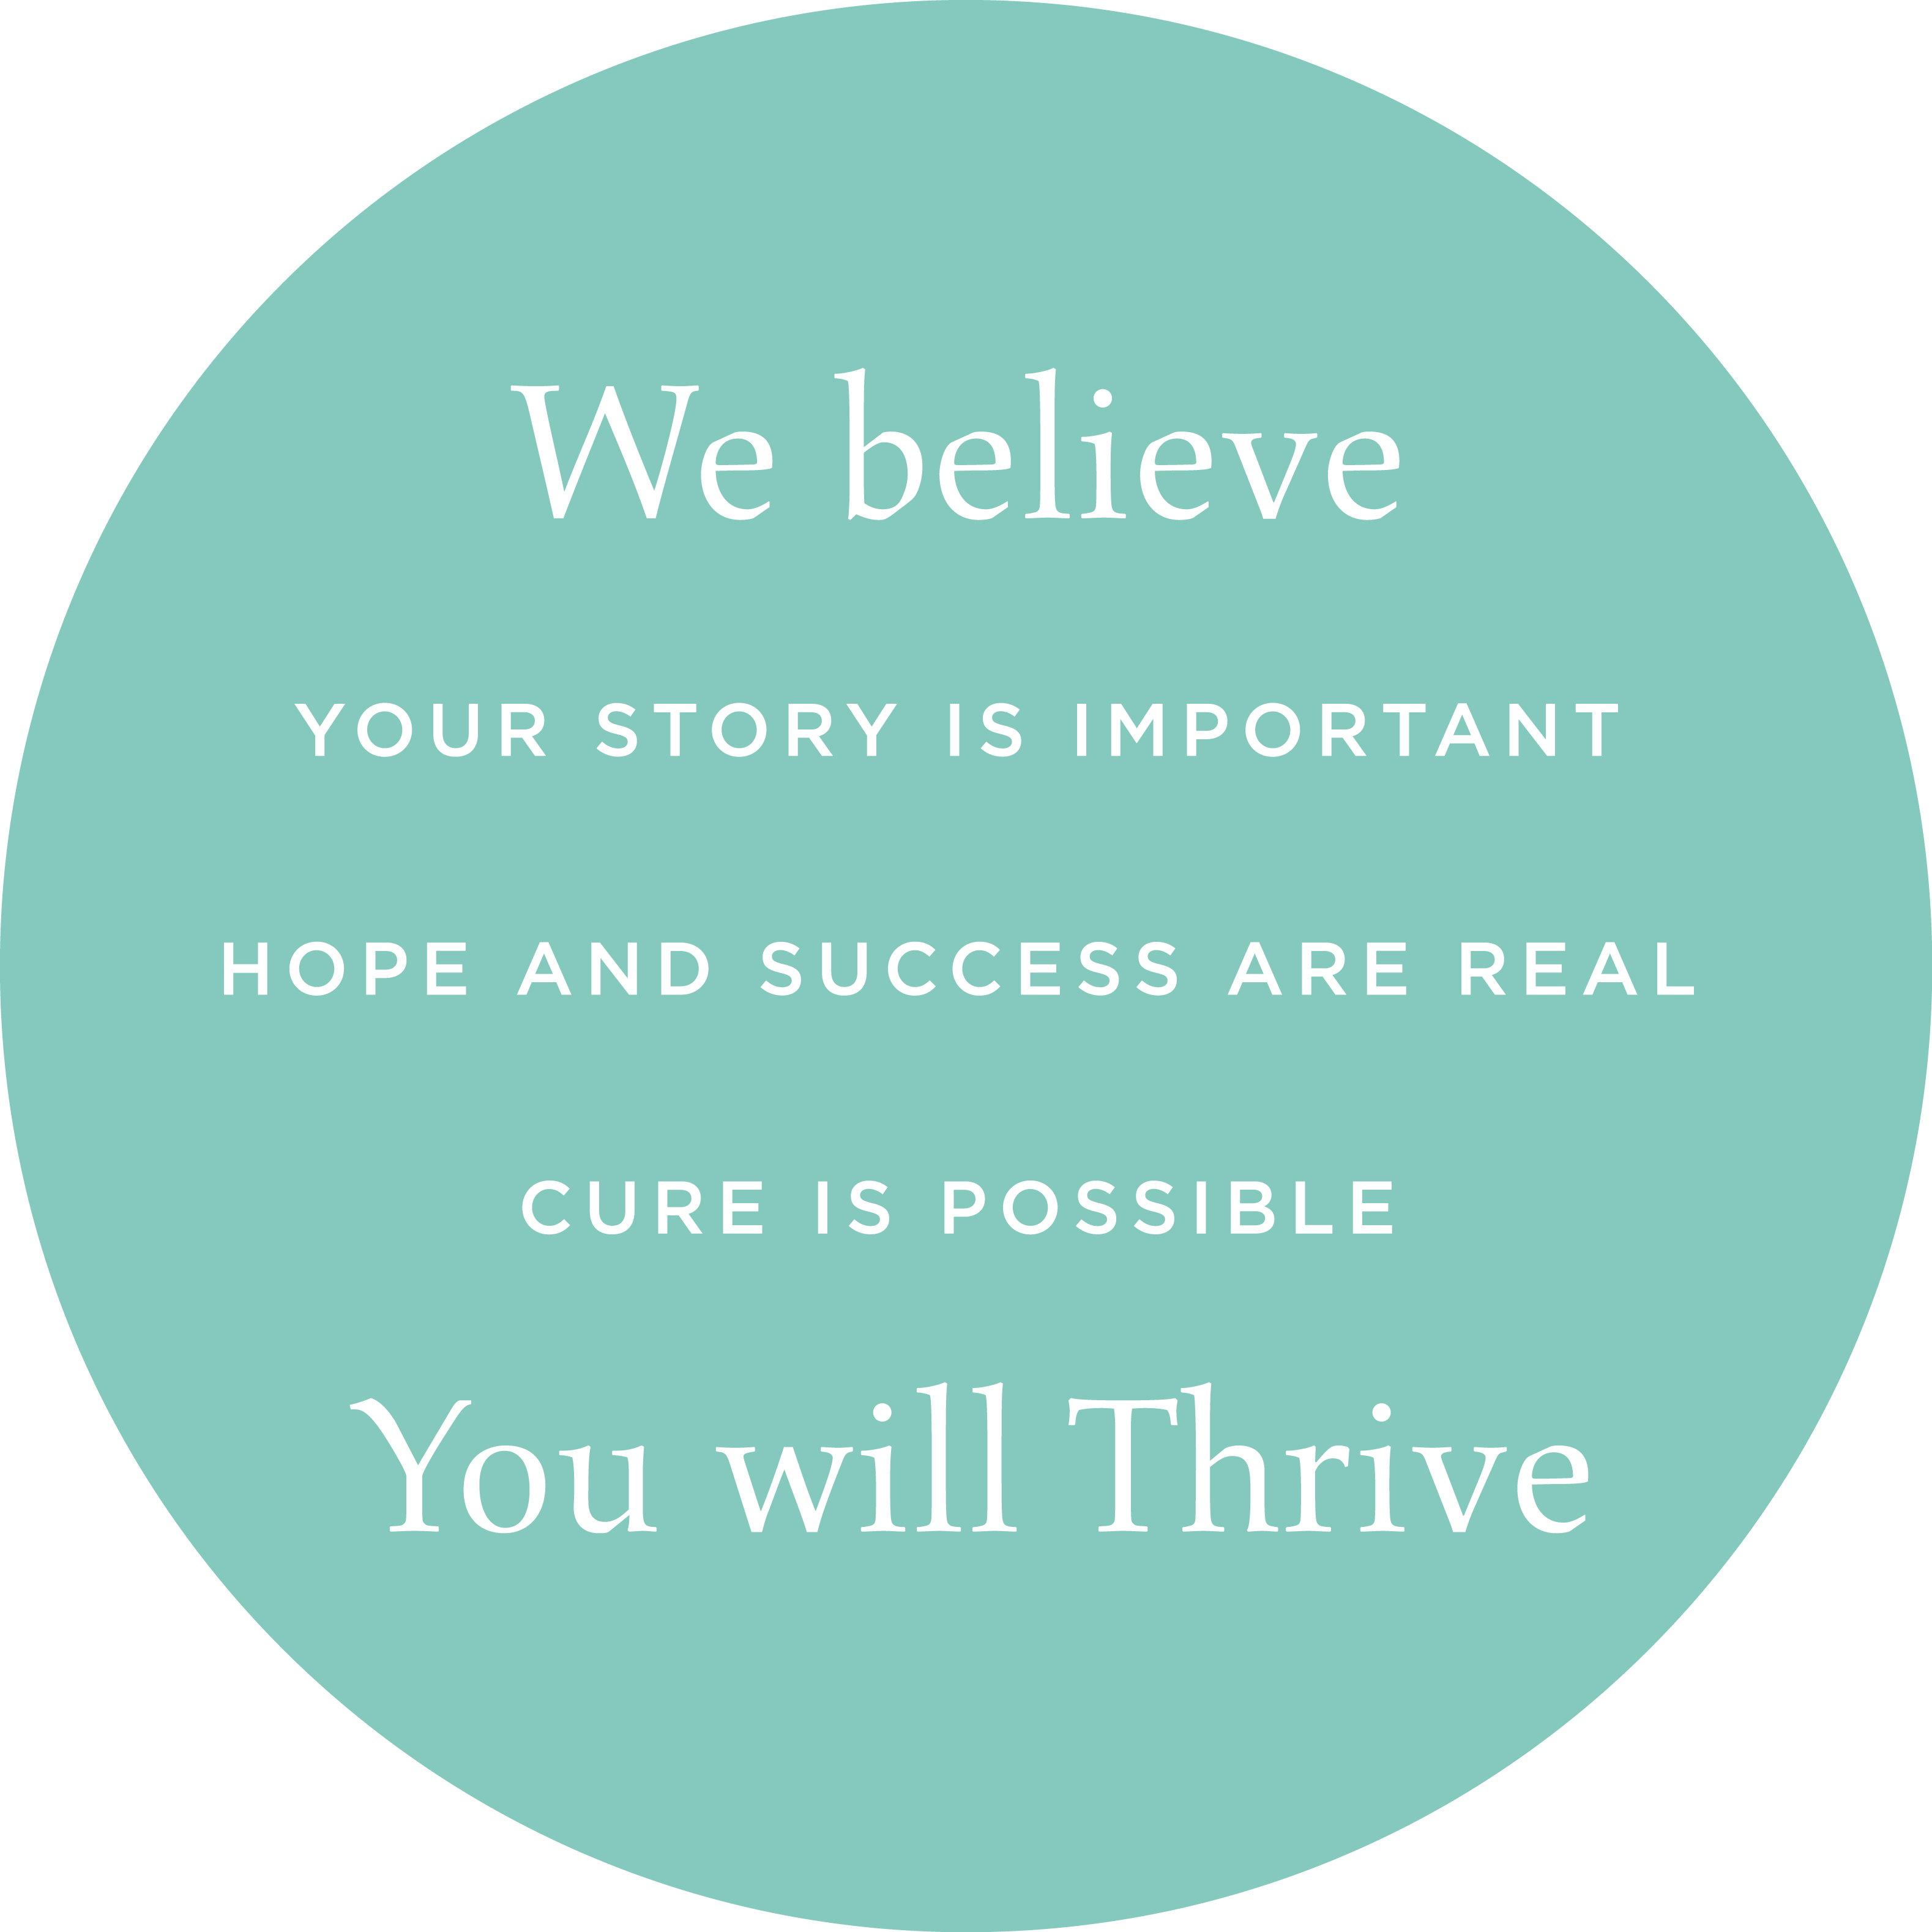 We believe, your story is important, hope and success are real, cure is possible, you will thrive.